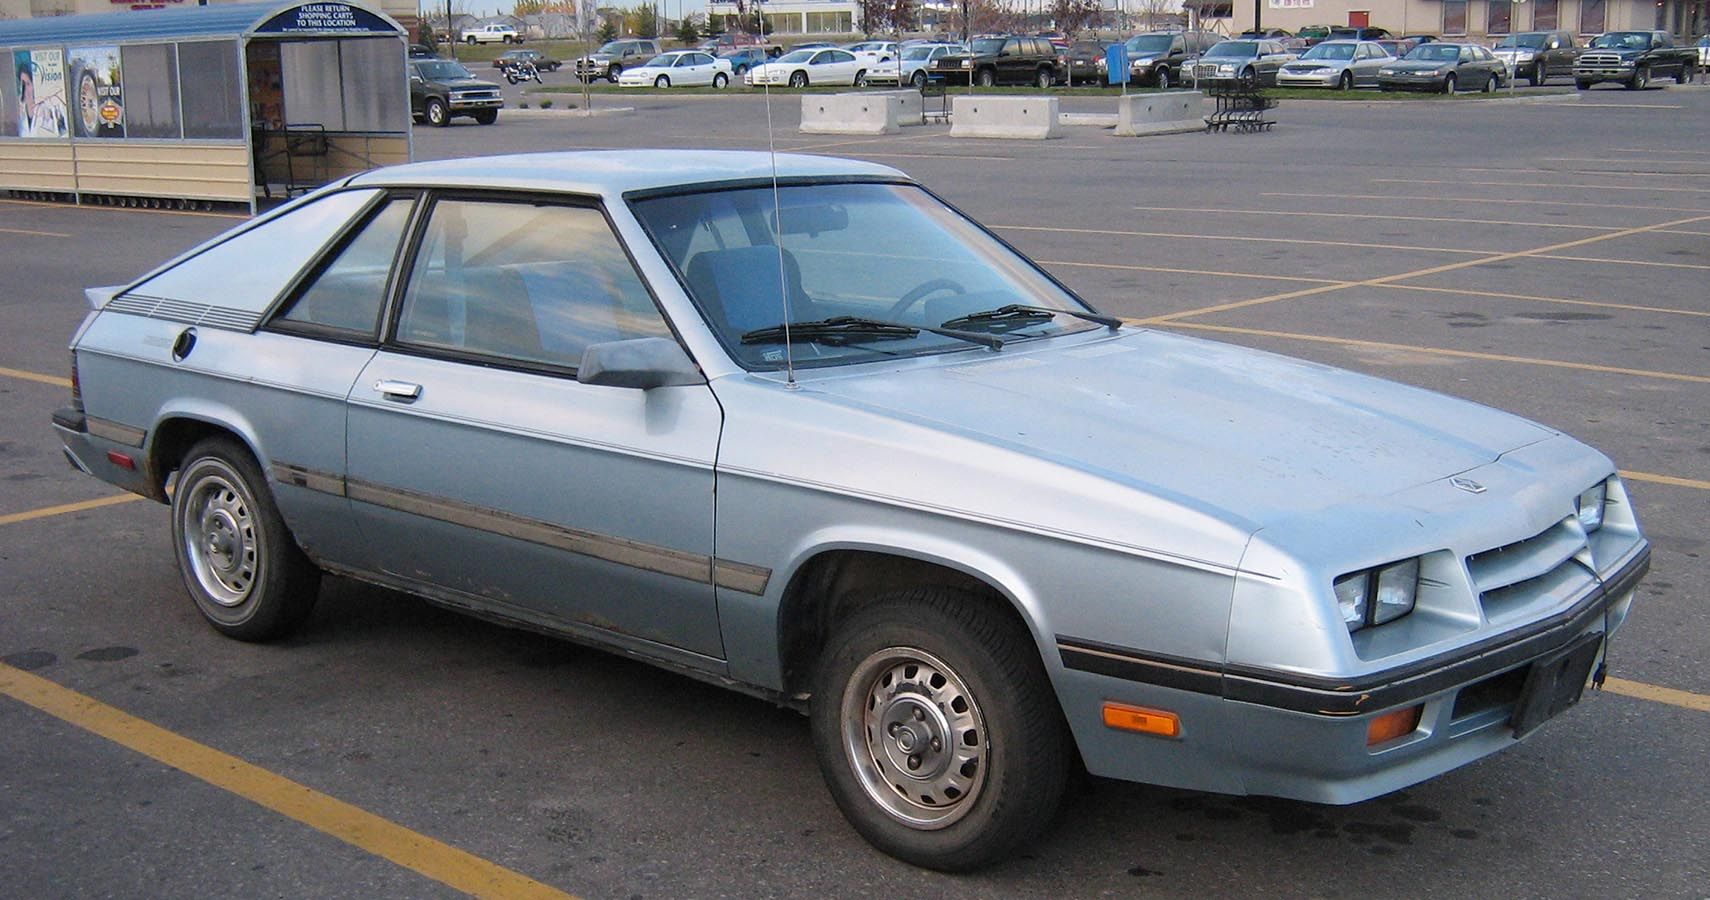 1982-1987 Dodge Charger: When The Charger Was An Omni Trim